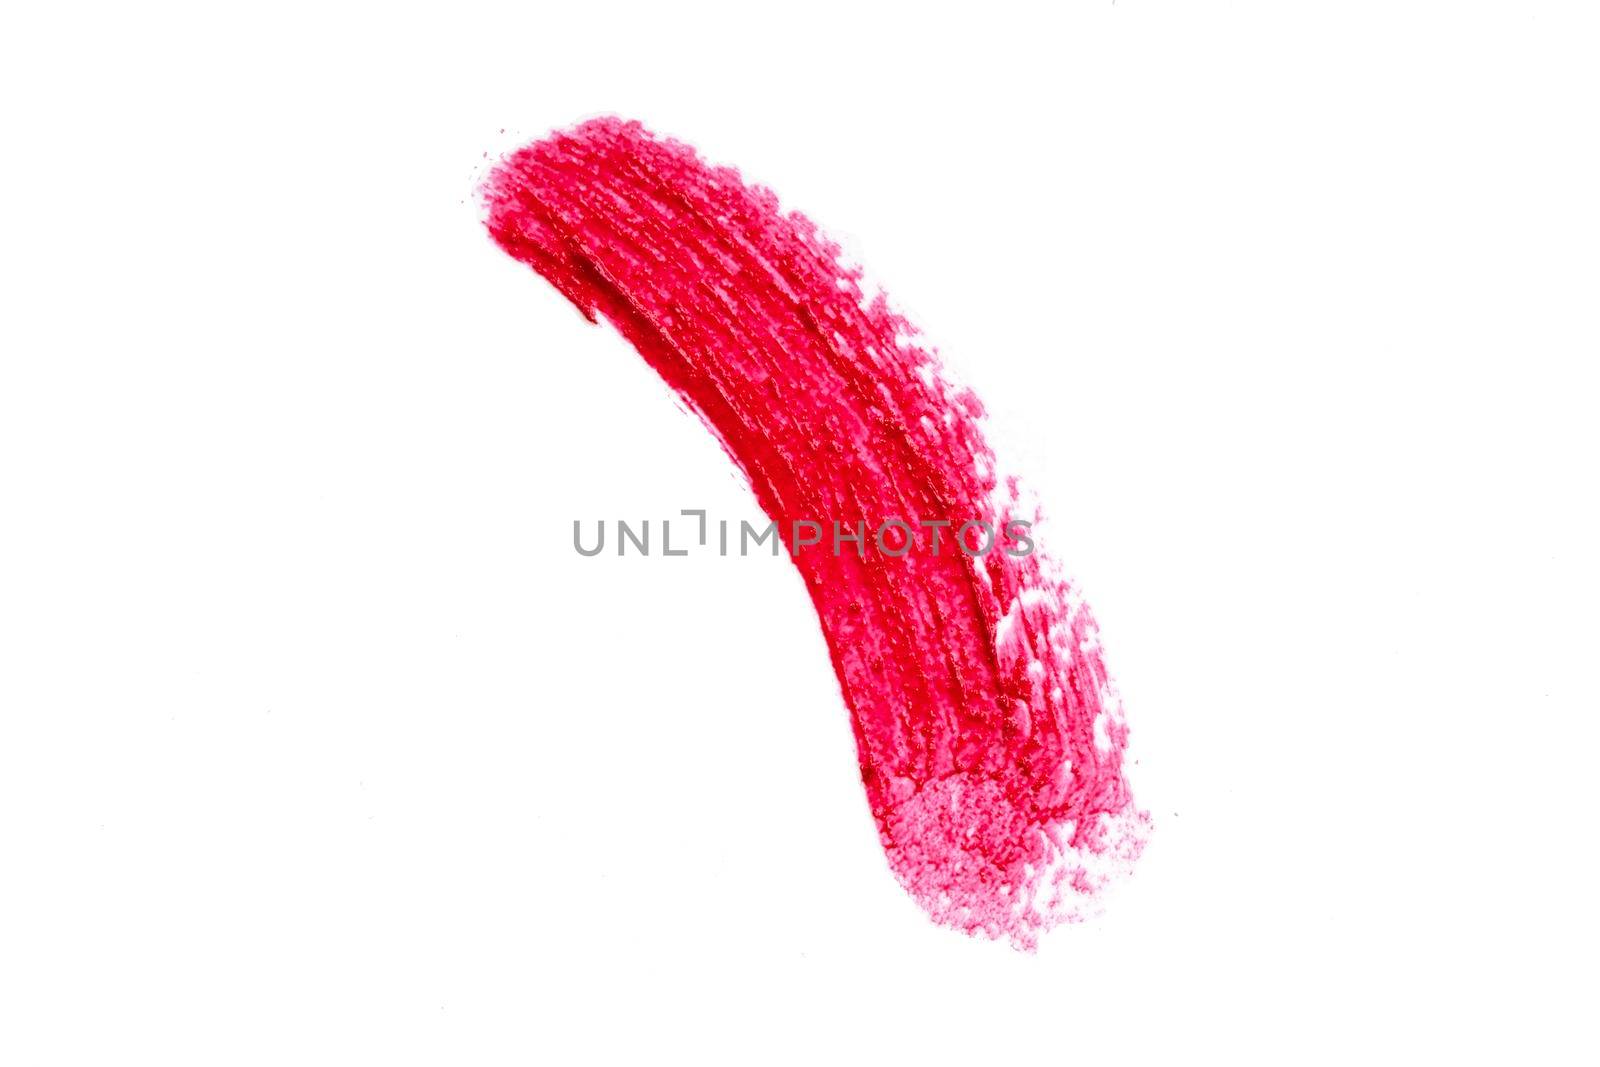 Lipstick smear smudge swipe isolated on white. Makeup brush stroke of red cosmetic product. Cream make up texture. Textured hand drawn red oil sample brush stroke painting.